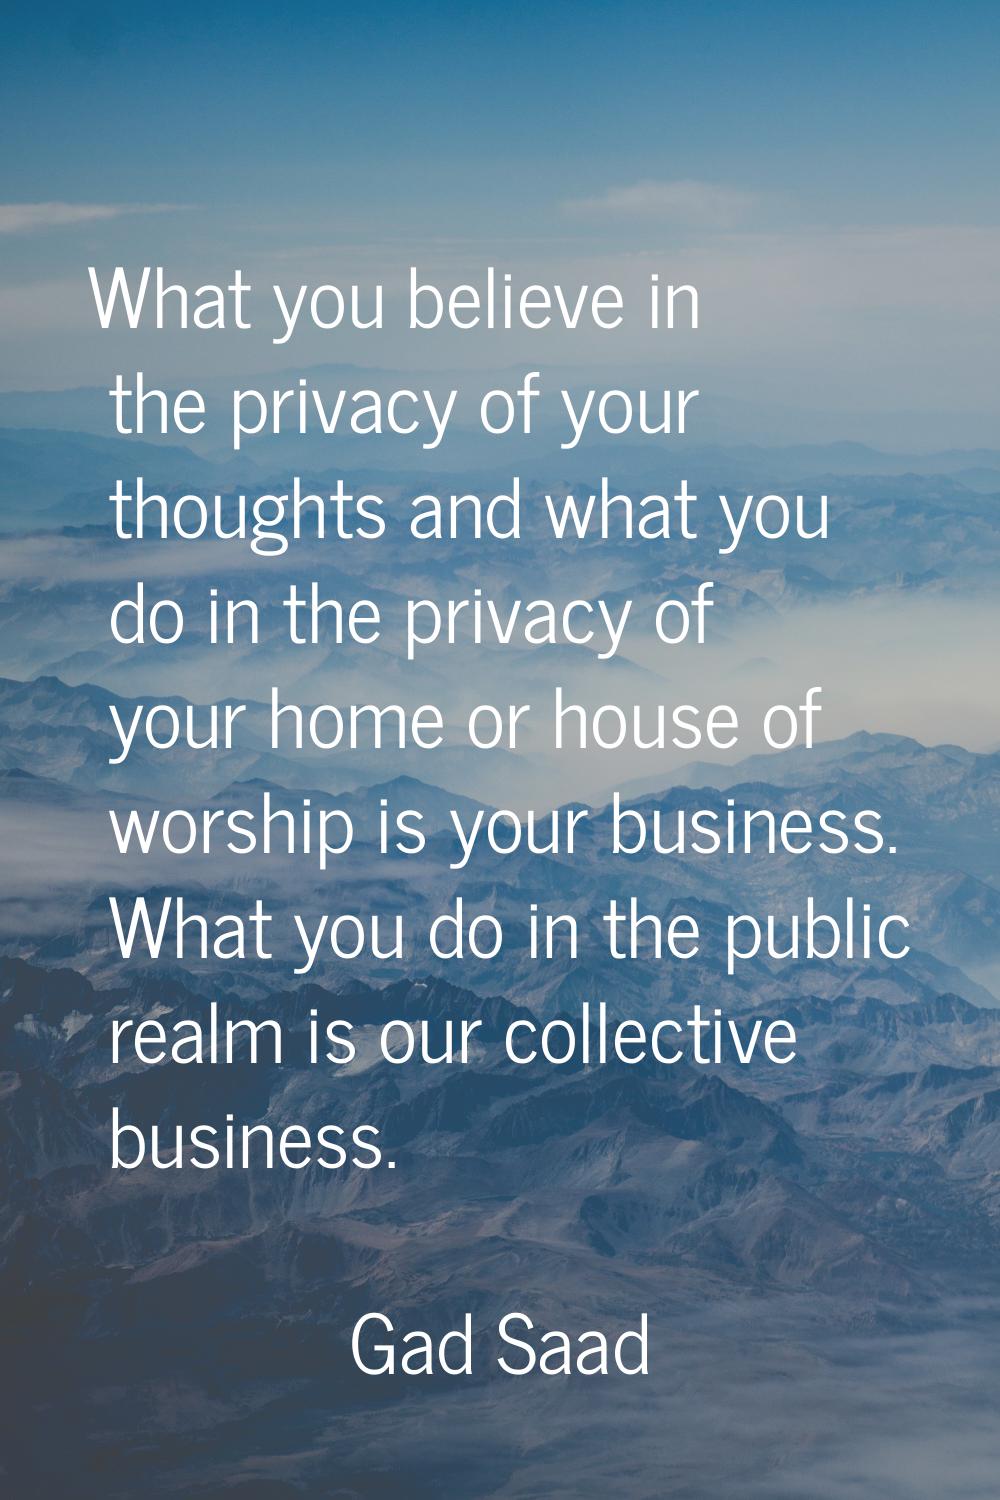 What you believe in the privacy of your thoughts and what you do in the privacy of your home or hou